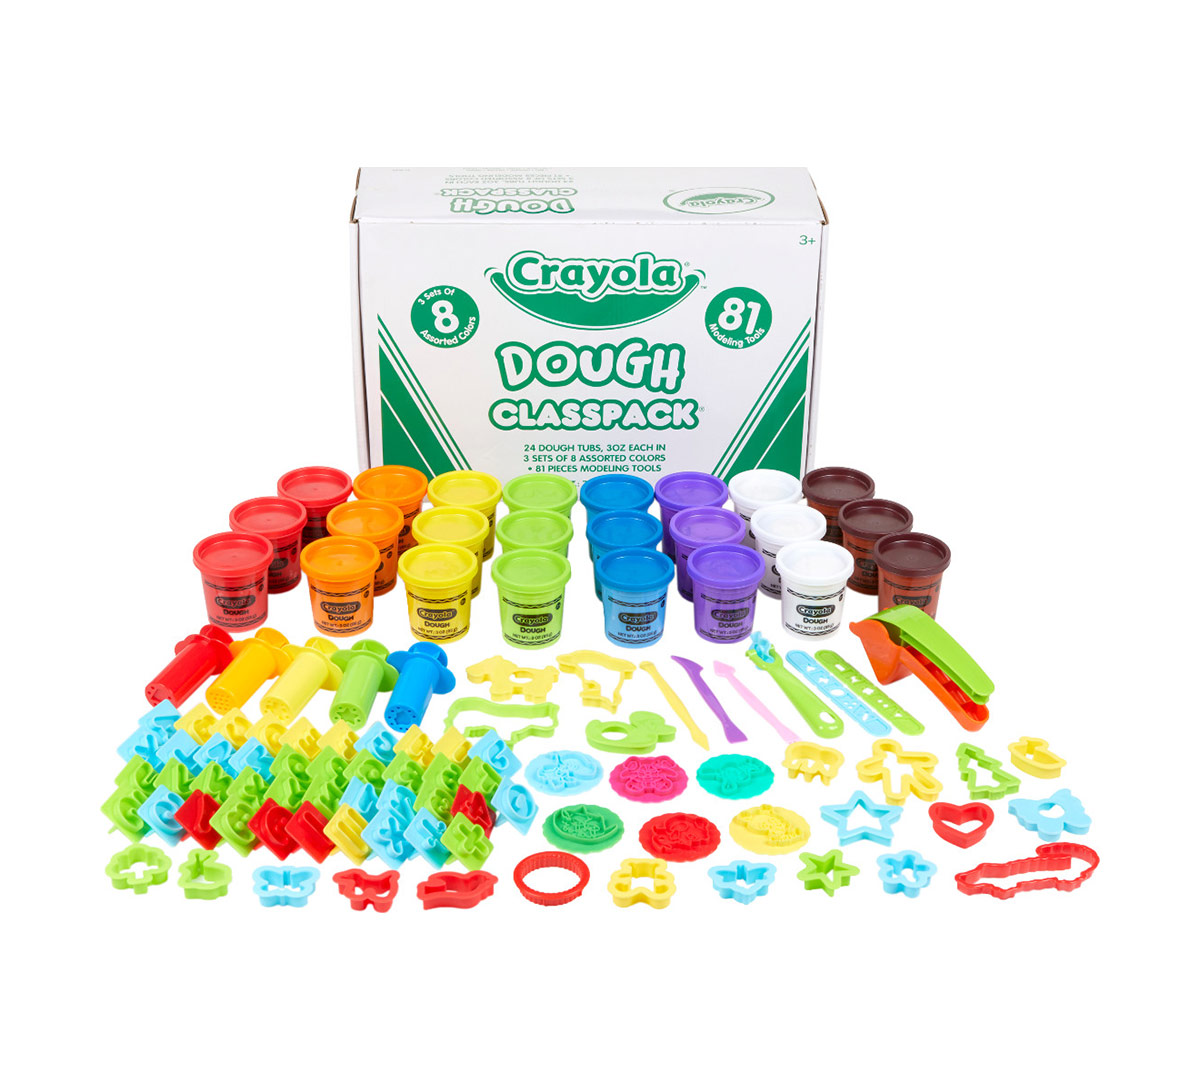 Play Dough Tool Kit - 12 Plastic Tools for Kids, Including